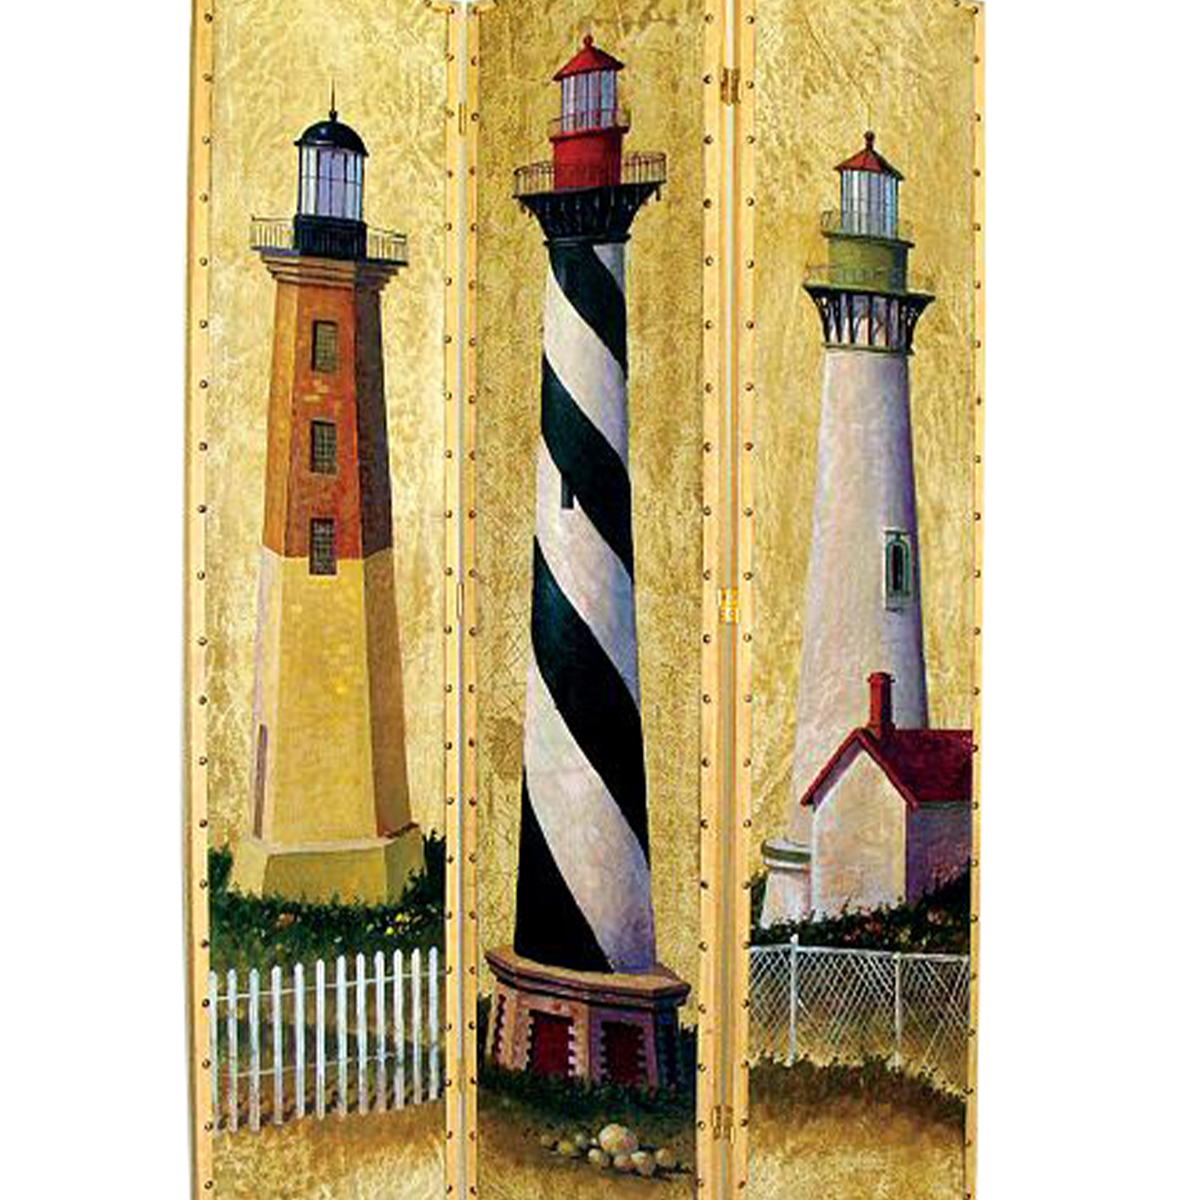 Hand Painted 3 Panel Wooden Room Divider With Lighthouses Print, Multicolor- Saltoro Sherpi